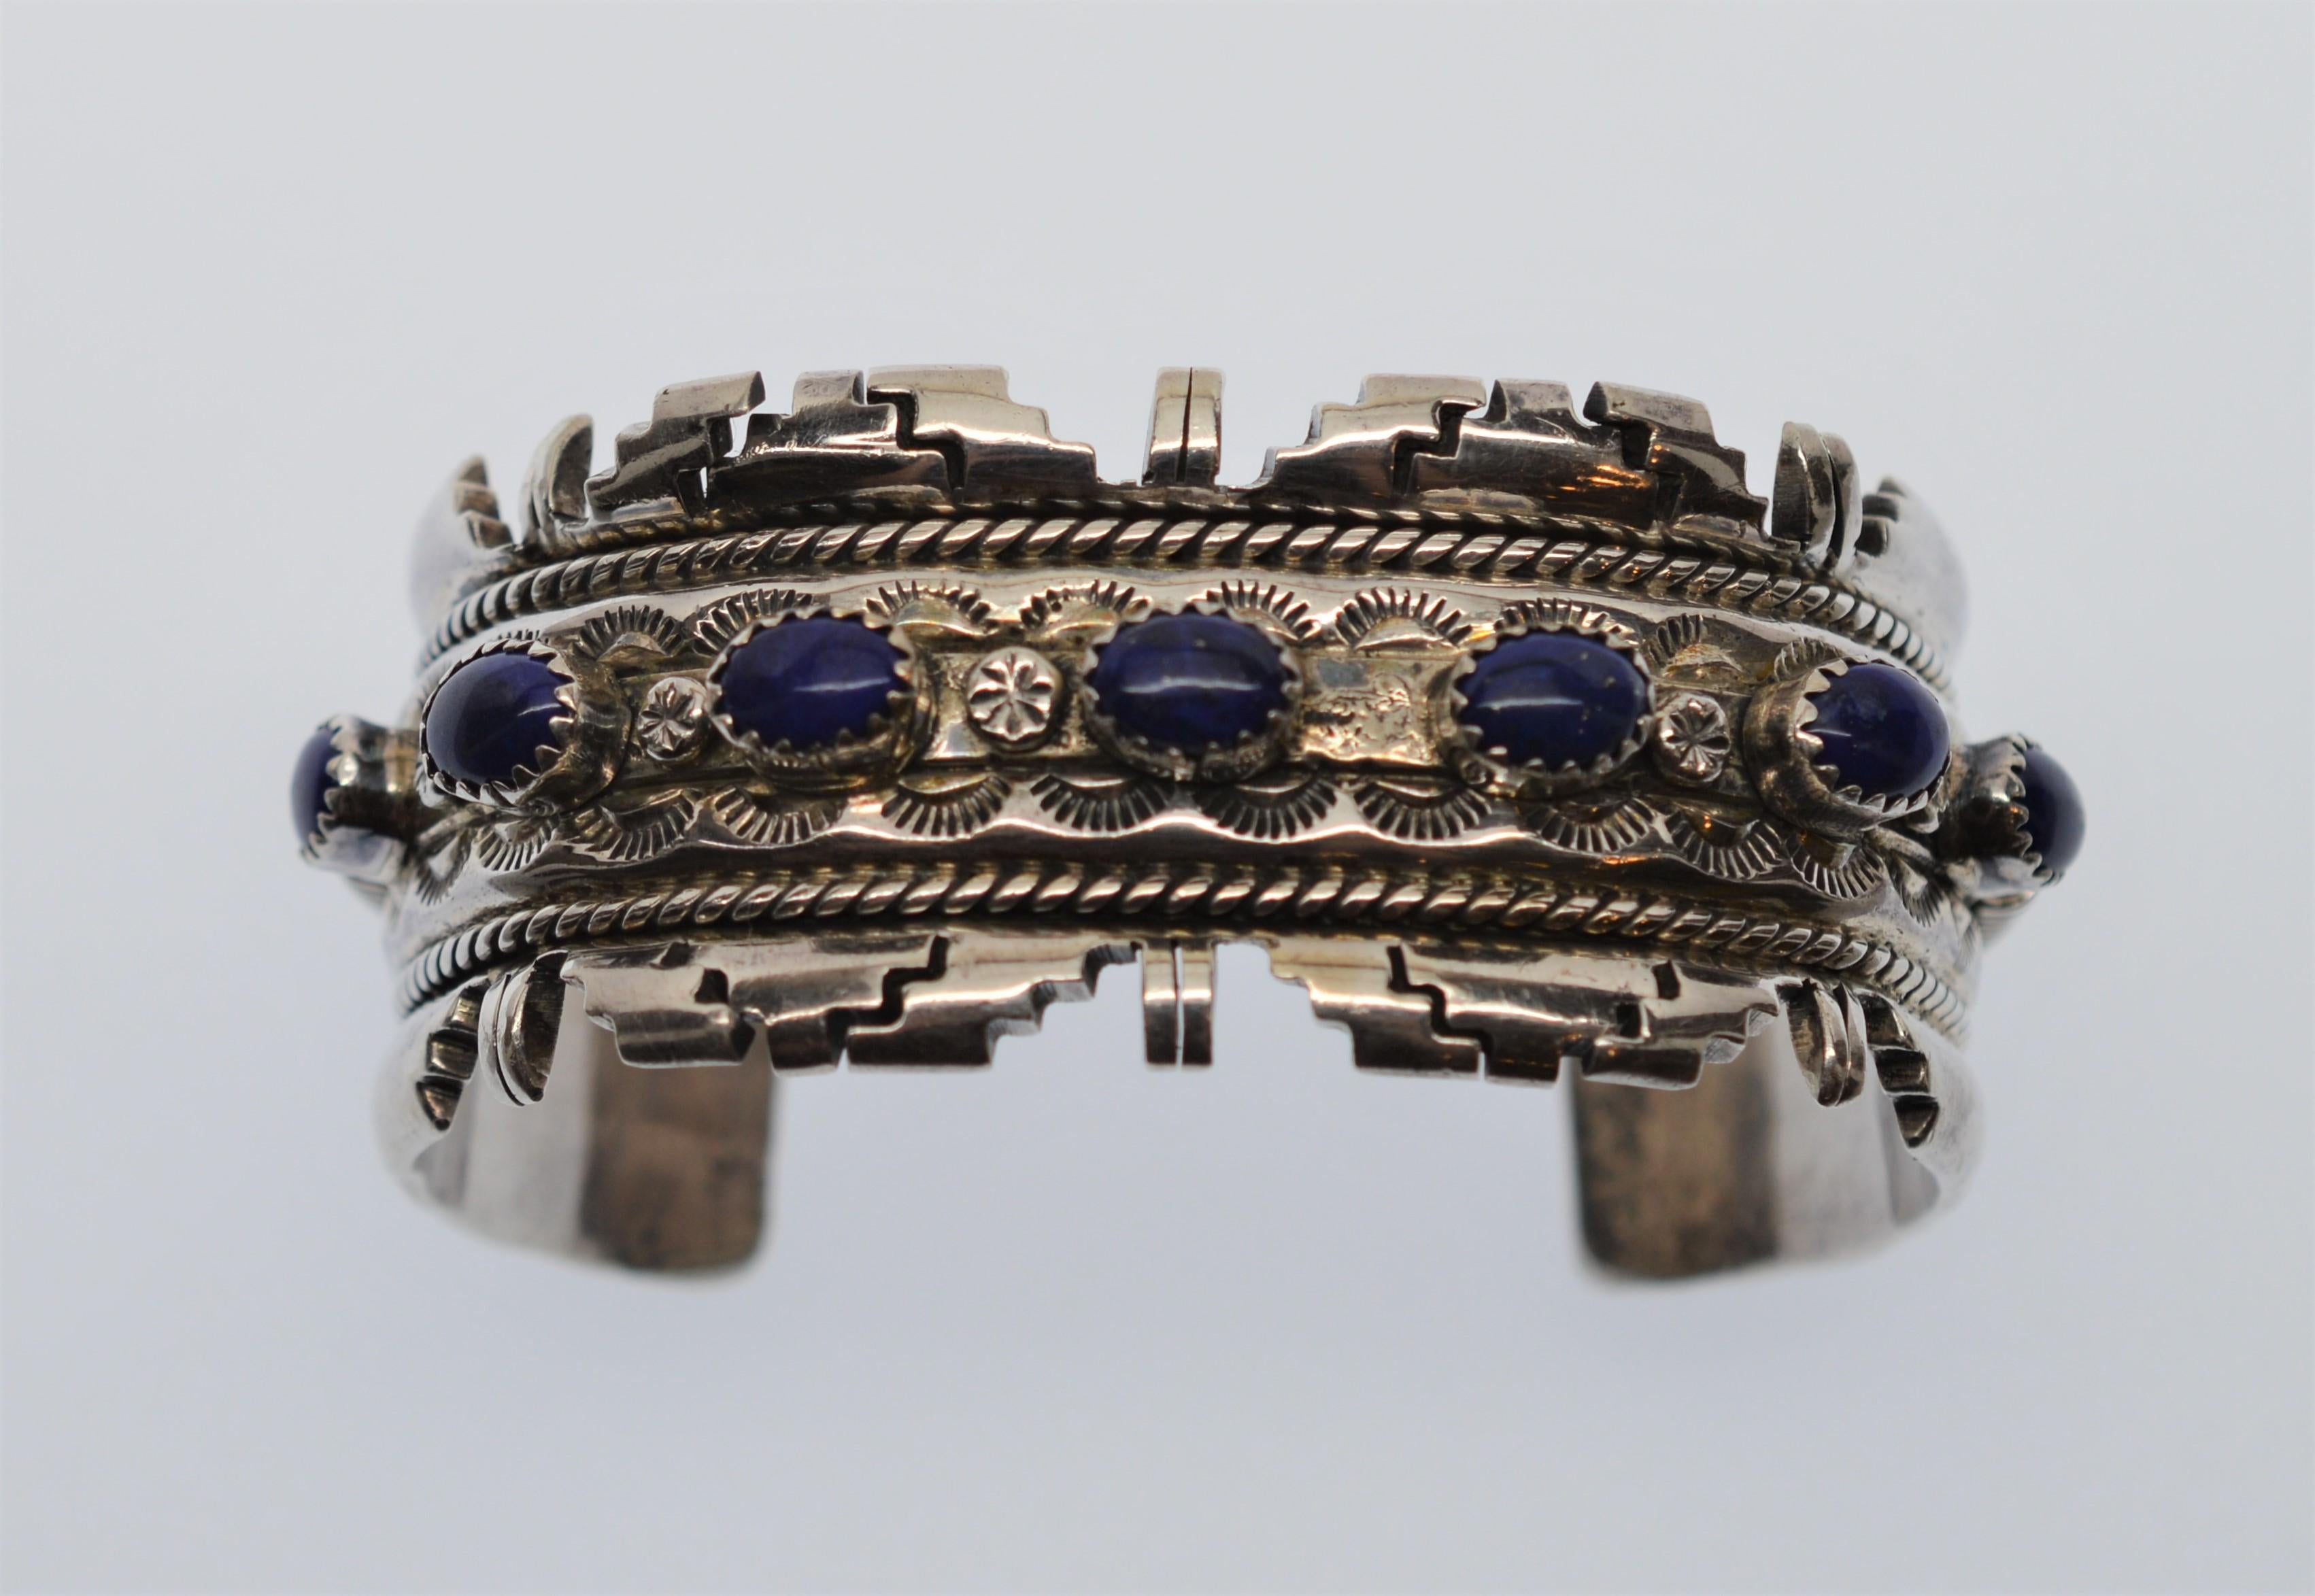 Intricately crafted Southwest Sterling Silver Cuff Bracelet with seven deep dark Blue Lapis Stones.
This impressive Silver Cuff Bracelet is a statement piece with it's extraordinary cast and hand-chased detail in Sterling Silver and inlaid Lapis